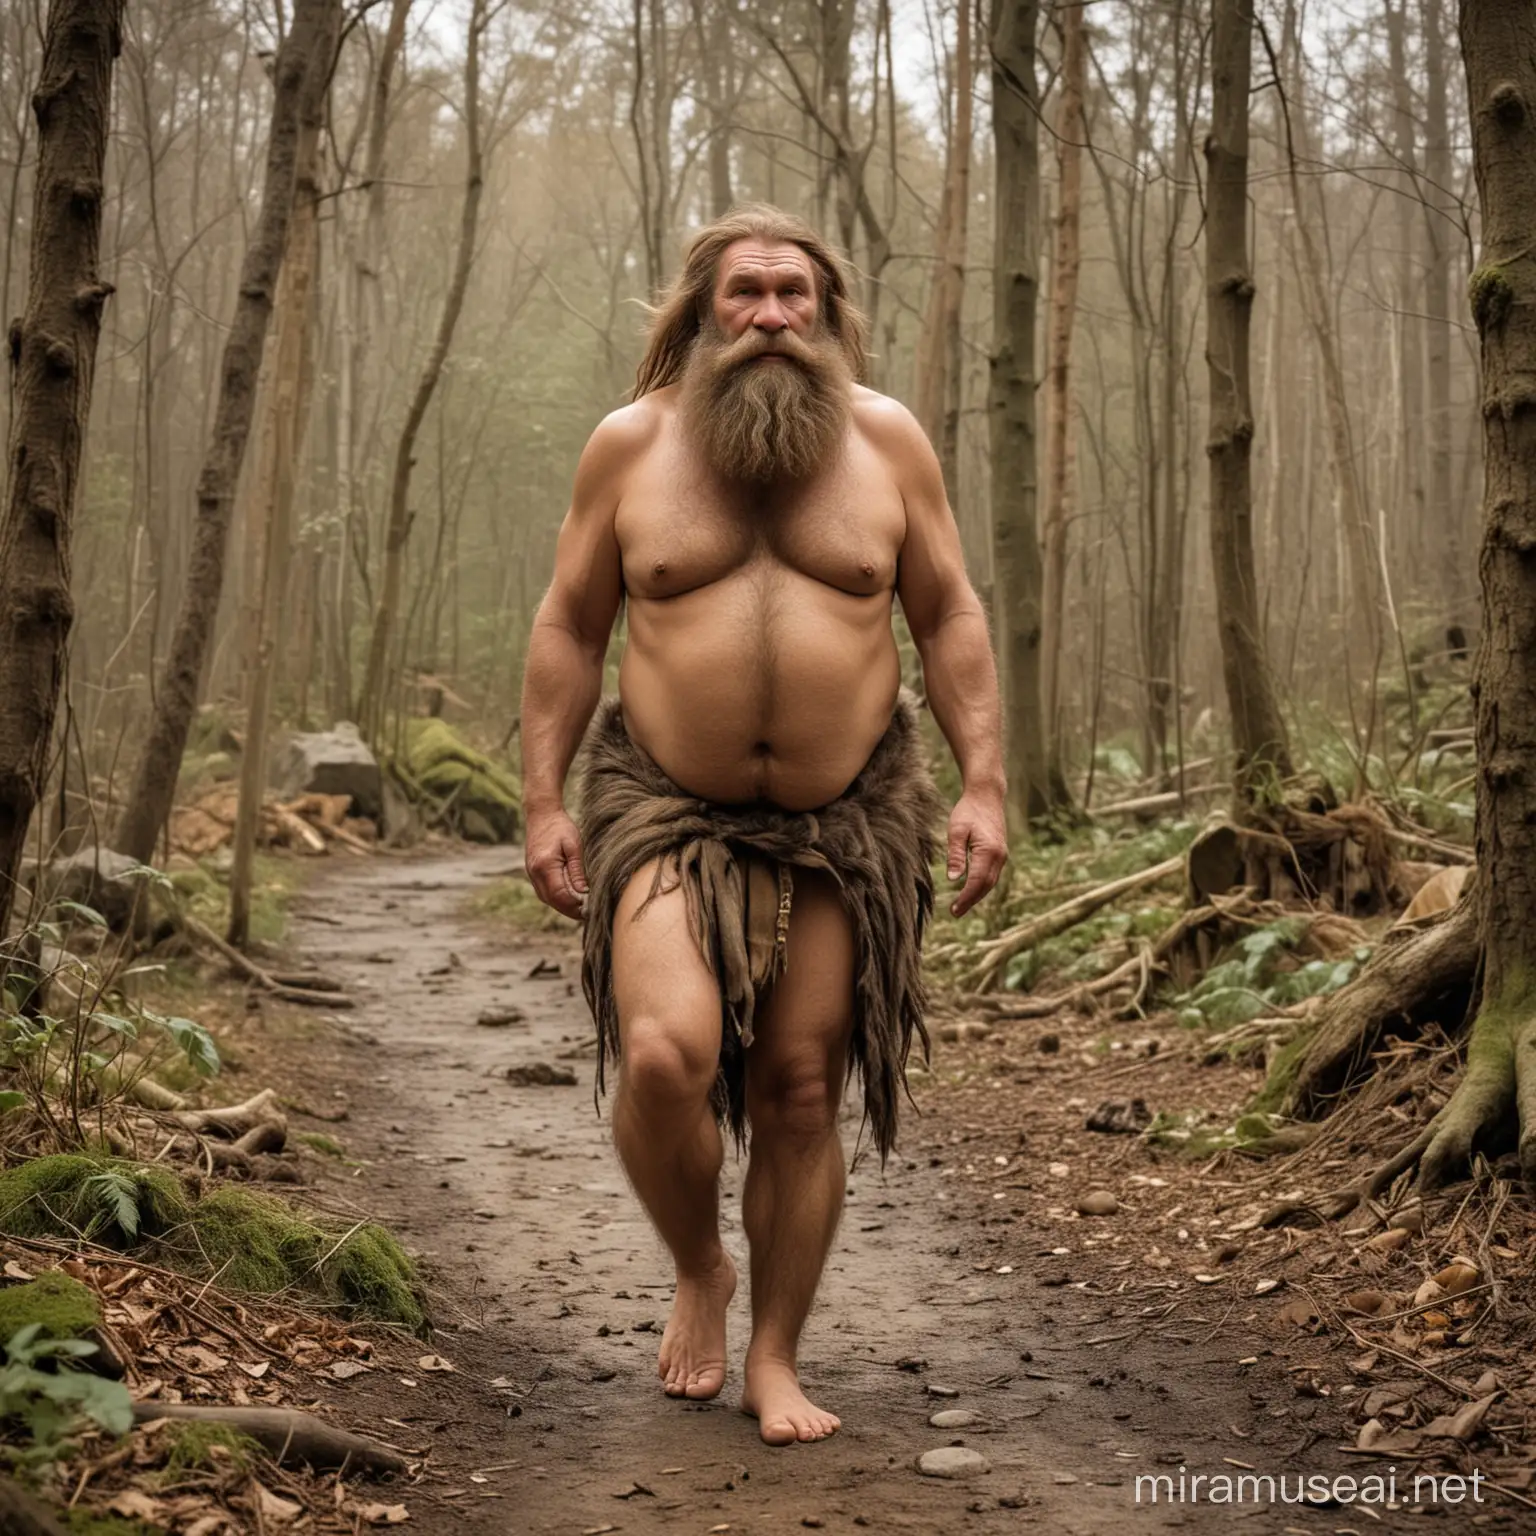 neanderthal,historic human,hairy,long beard,Mess hair,old age,chubby,dumpy,primitive,naked,deep forest,fur loincloth,full body,hiking,barefoot,large feet